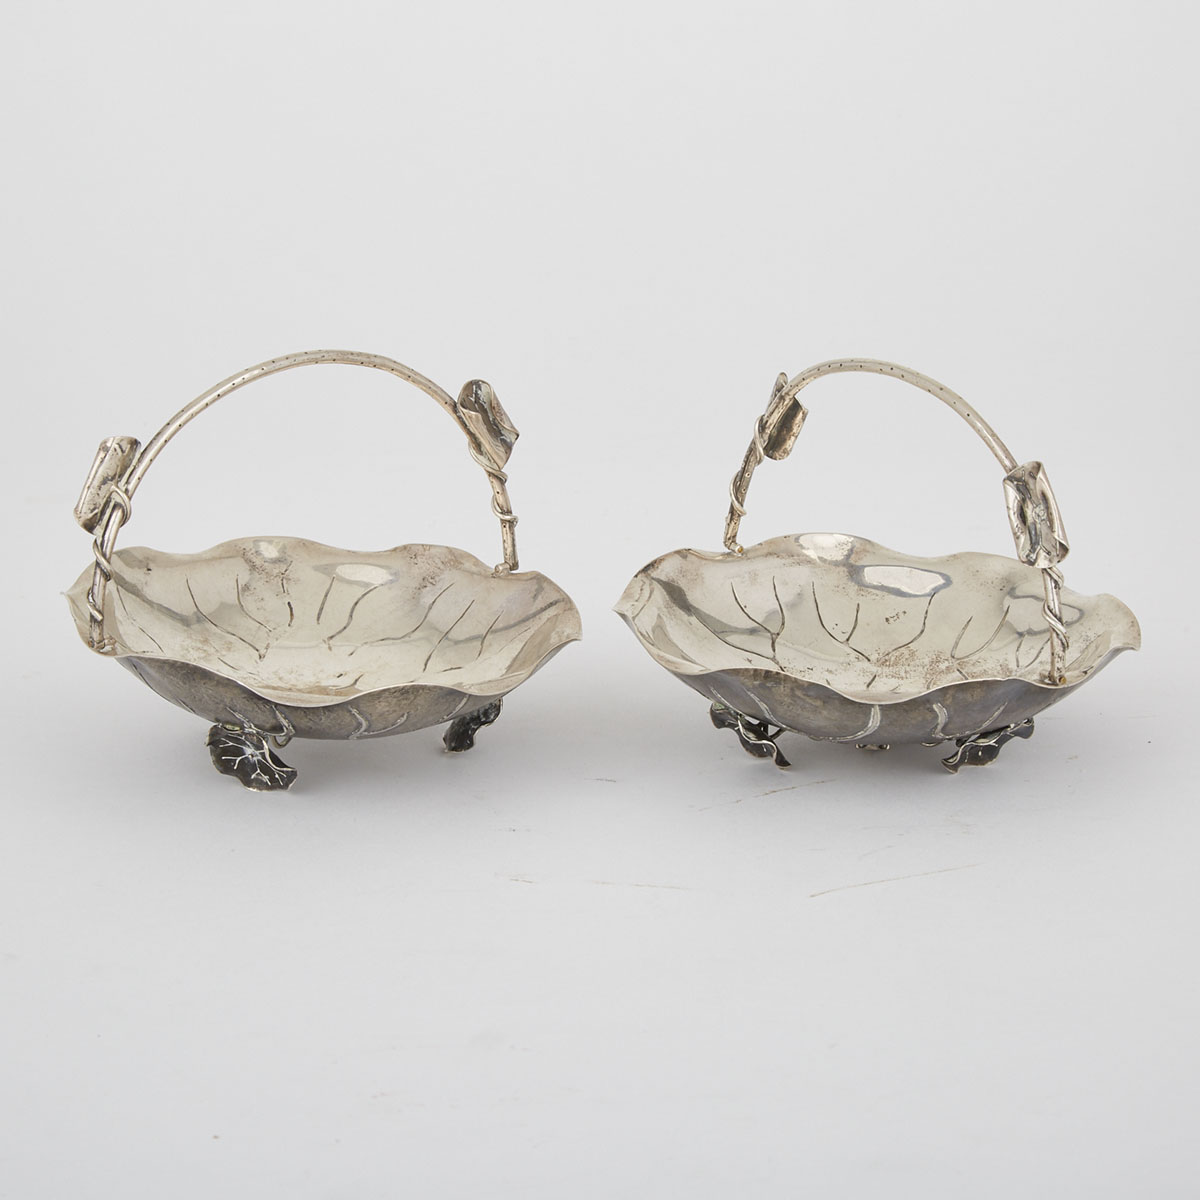 Pair of Chinese Silver Lotus Leaf Baskets, Early 20th Century